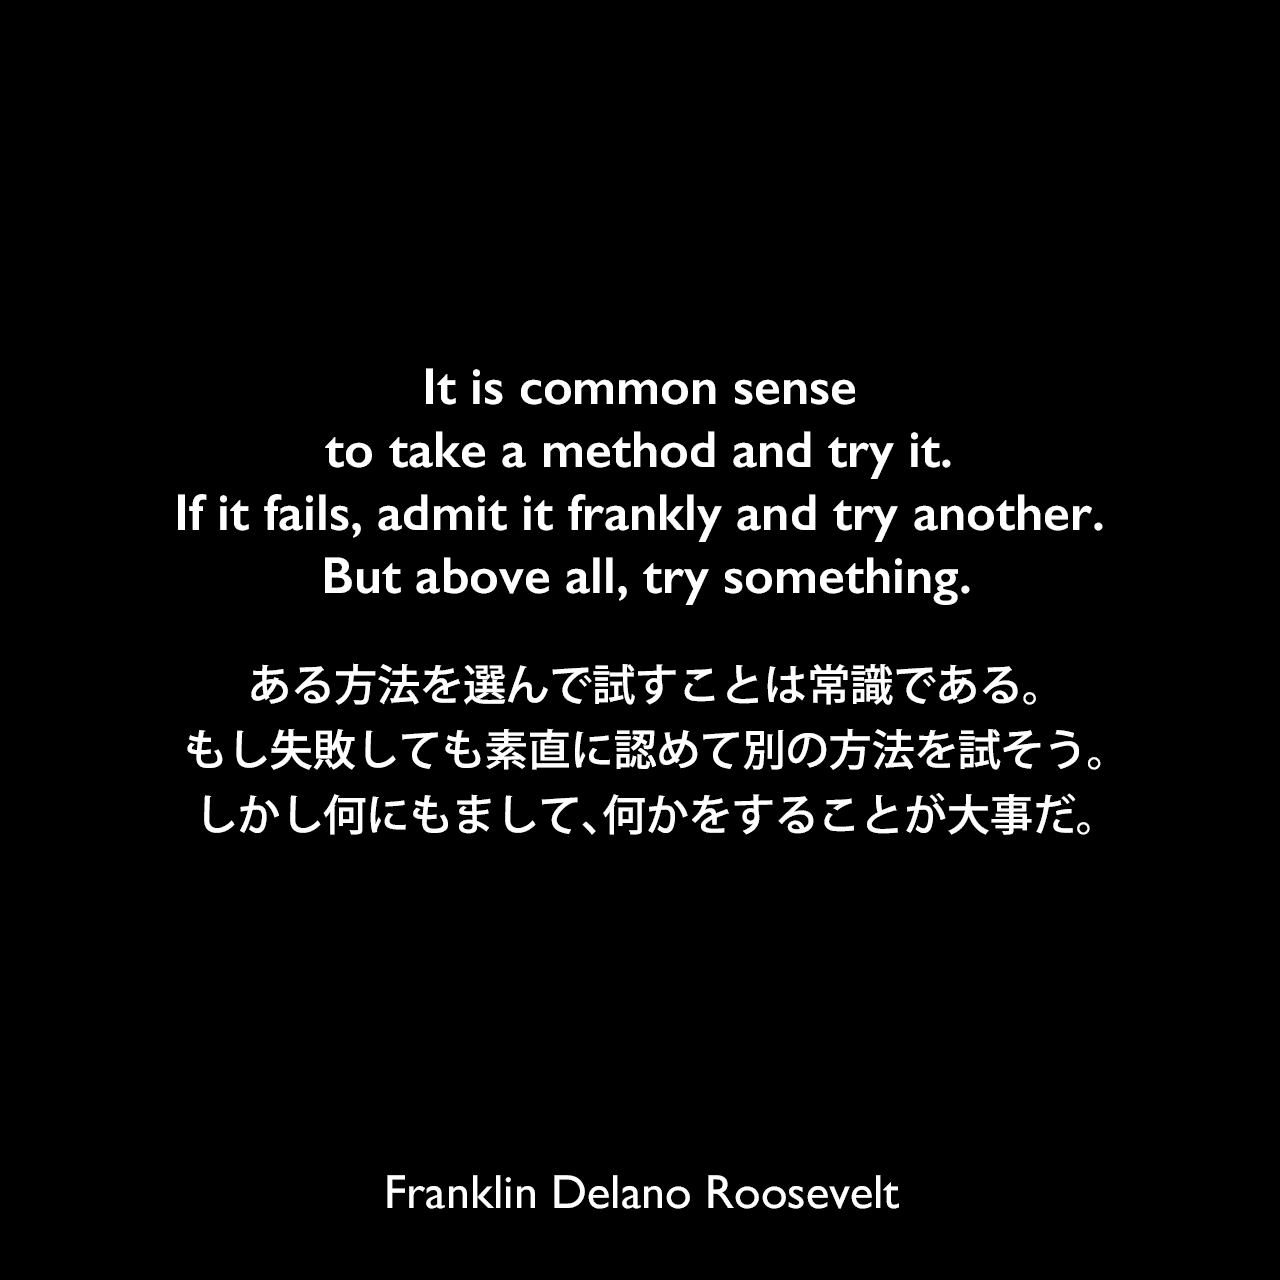 It is common sense to take a method and try it. If it fails, admit it frankly and try another. But above all, try something.ある方法を選んで試すことは常識である。もし失敗しても素直に認めて別の方法を試そう。しかし何にもまして、何かをすることが大事だ。Franklin Delano Roosevelt